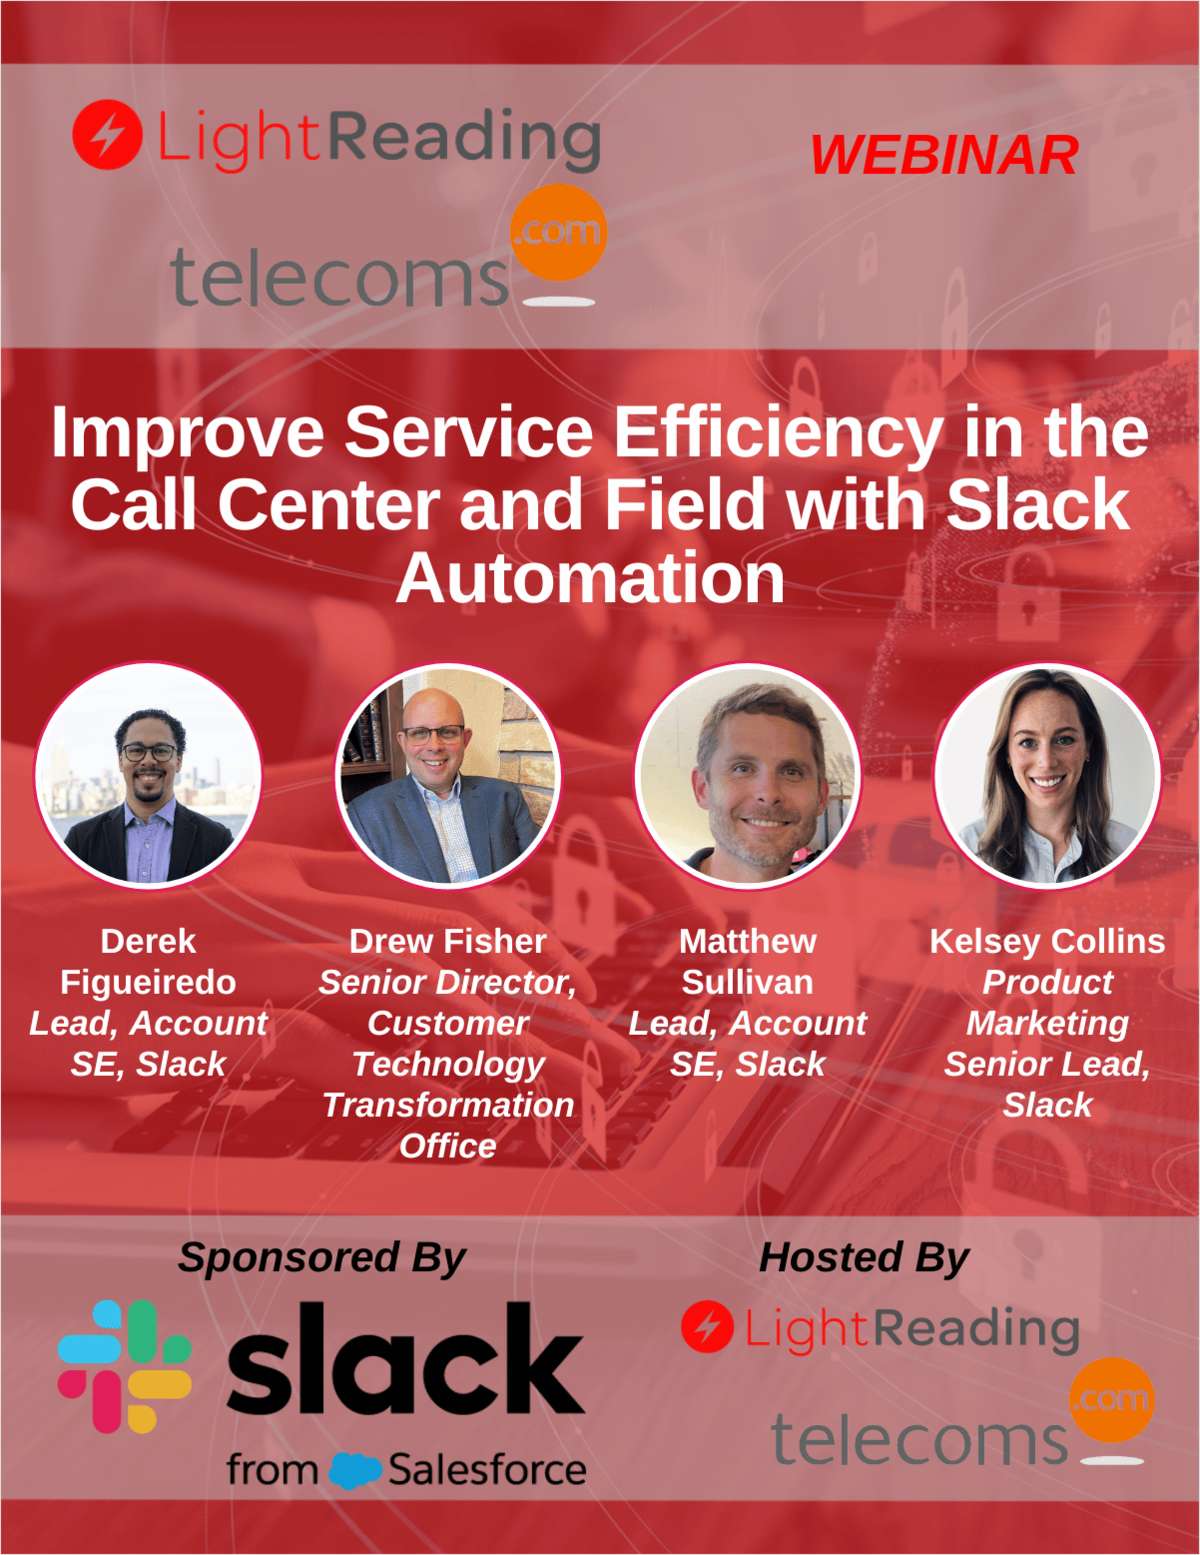 Improve Service Efficiency in the Call Center and Field with Slack Automation